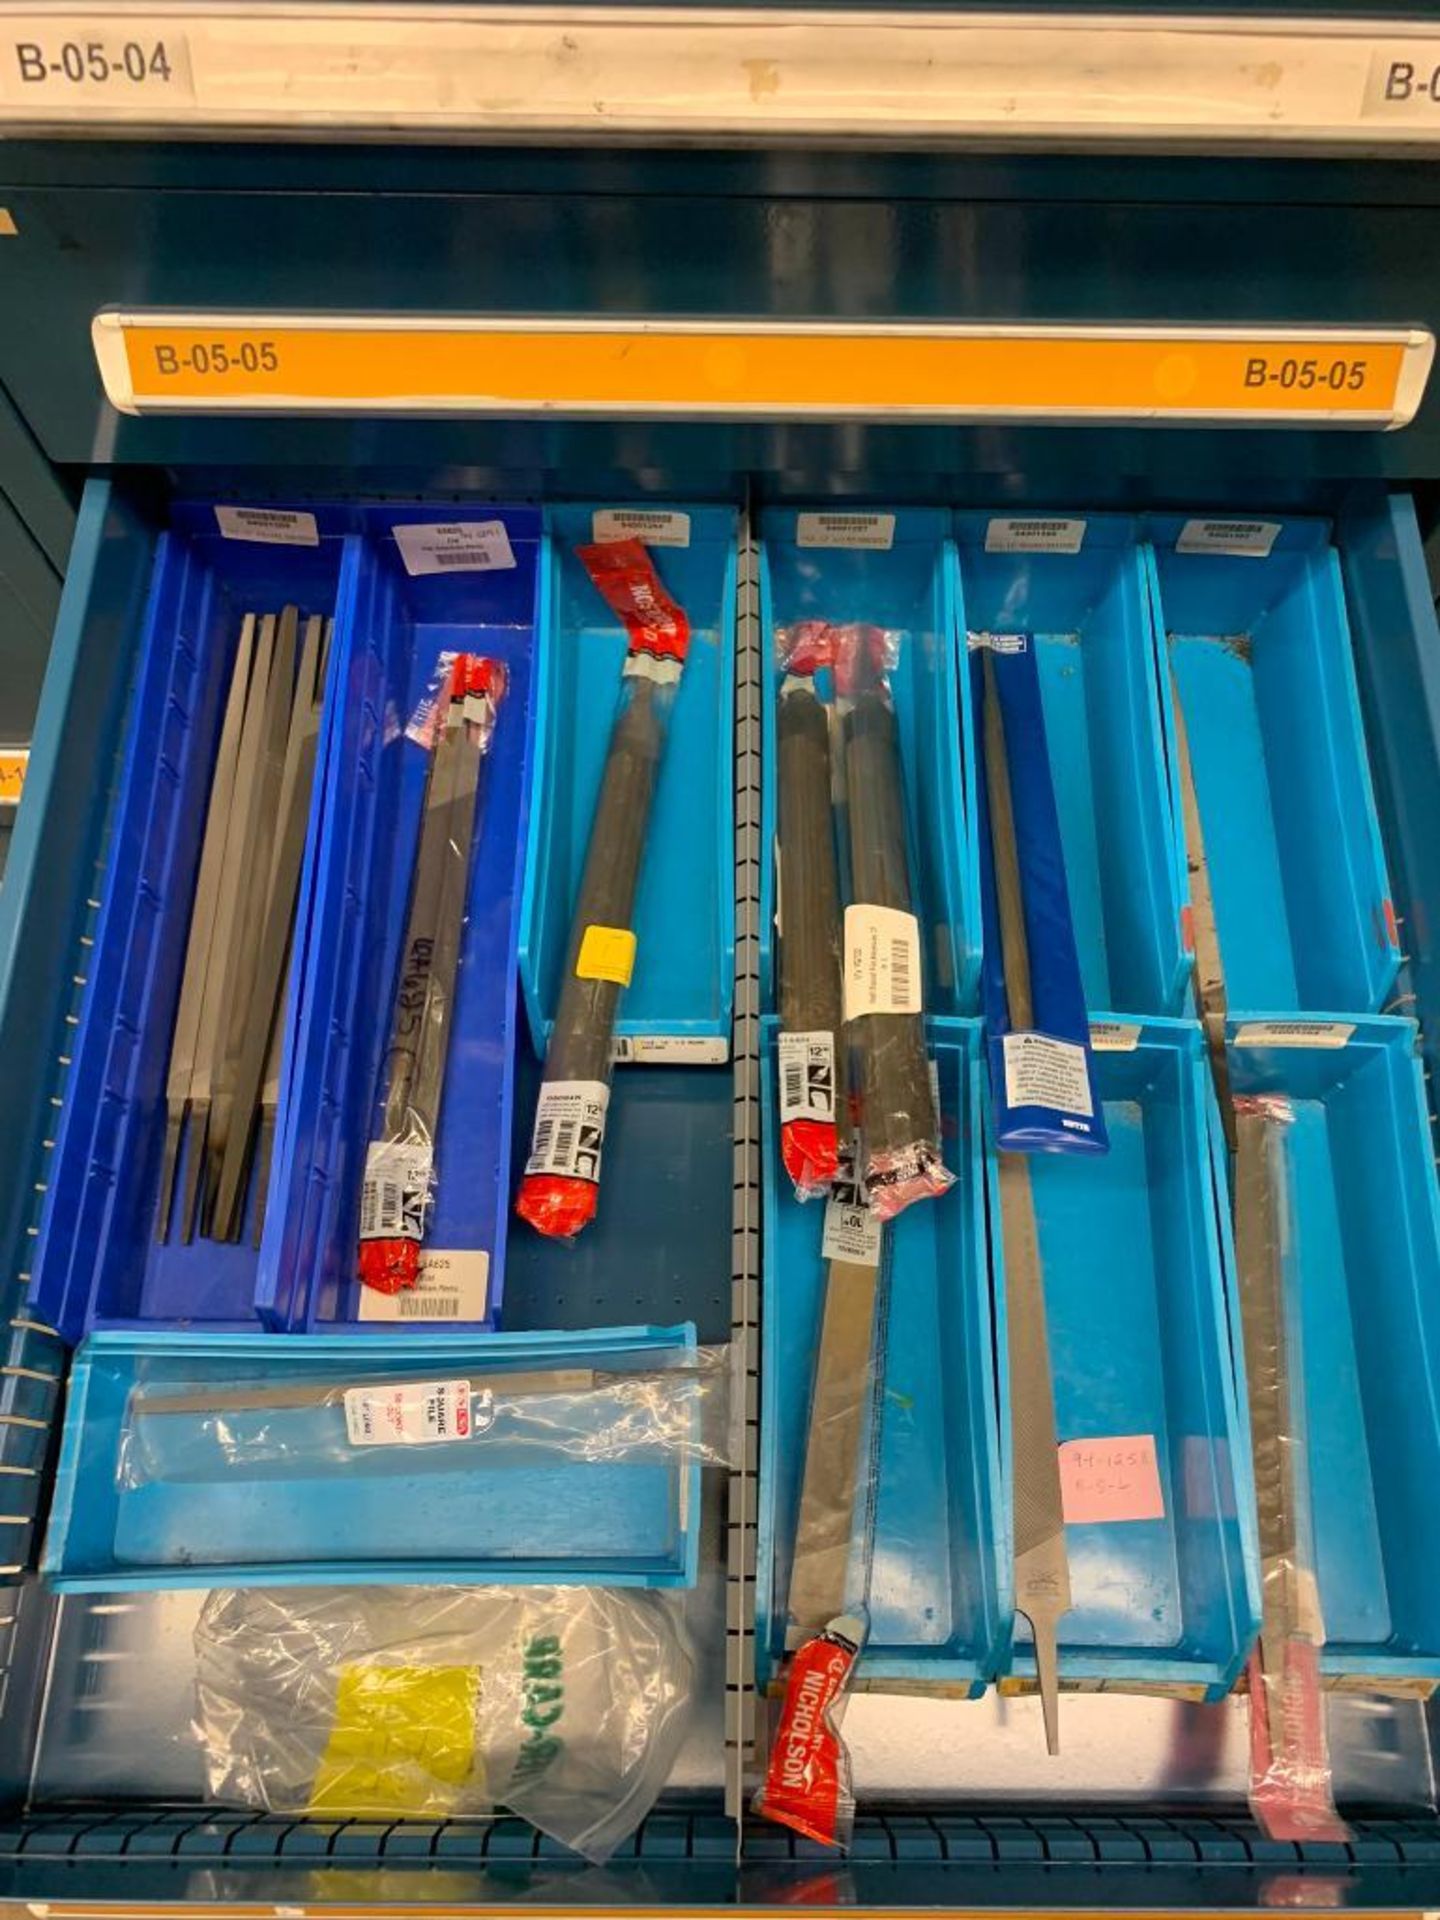 Vidmar 7-Drawer Cabinet w/ Assorted Files, Feeler Gage, Deburring Tools, Saw Blades - Image 7 of 8